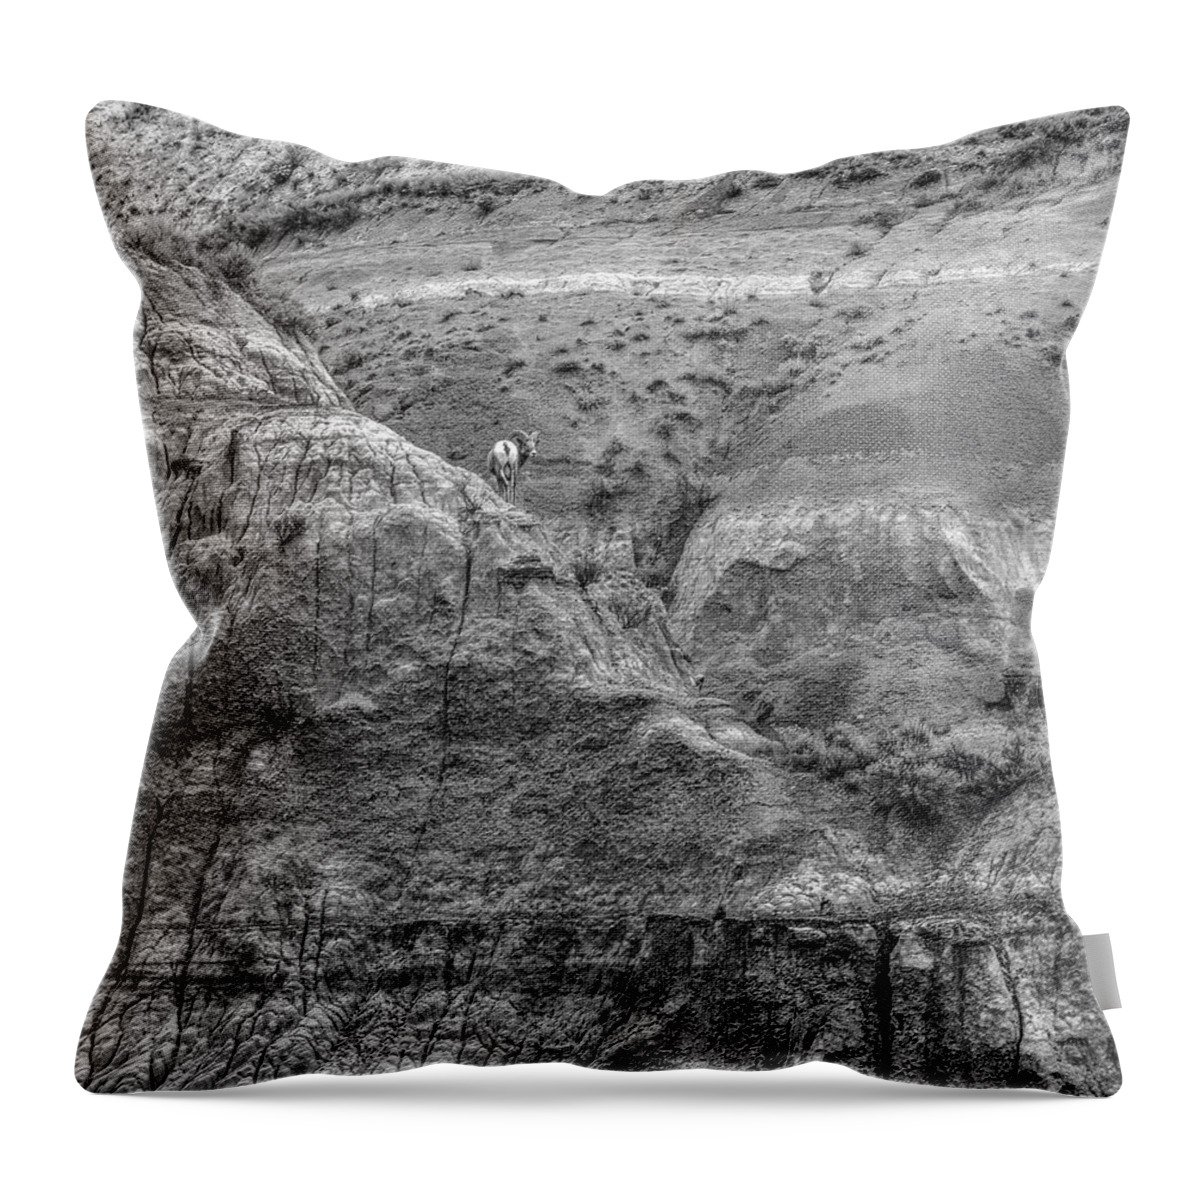 Disk1215 Throw Pillow featuring the photograph Bighorn Sheep Ram On Cliff by Tim Fitzharris